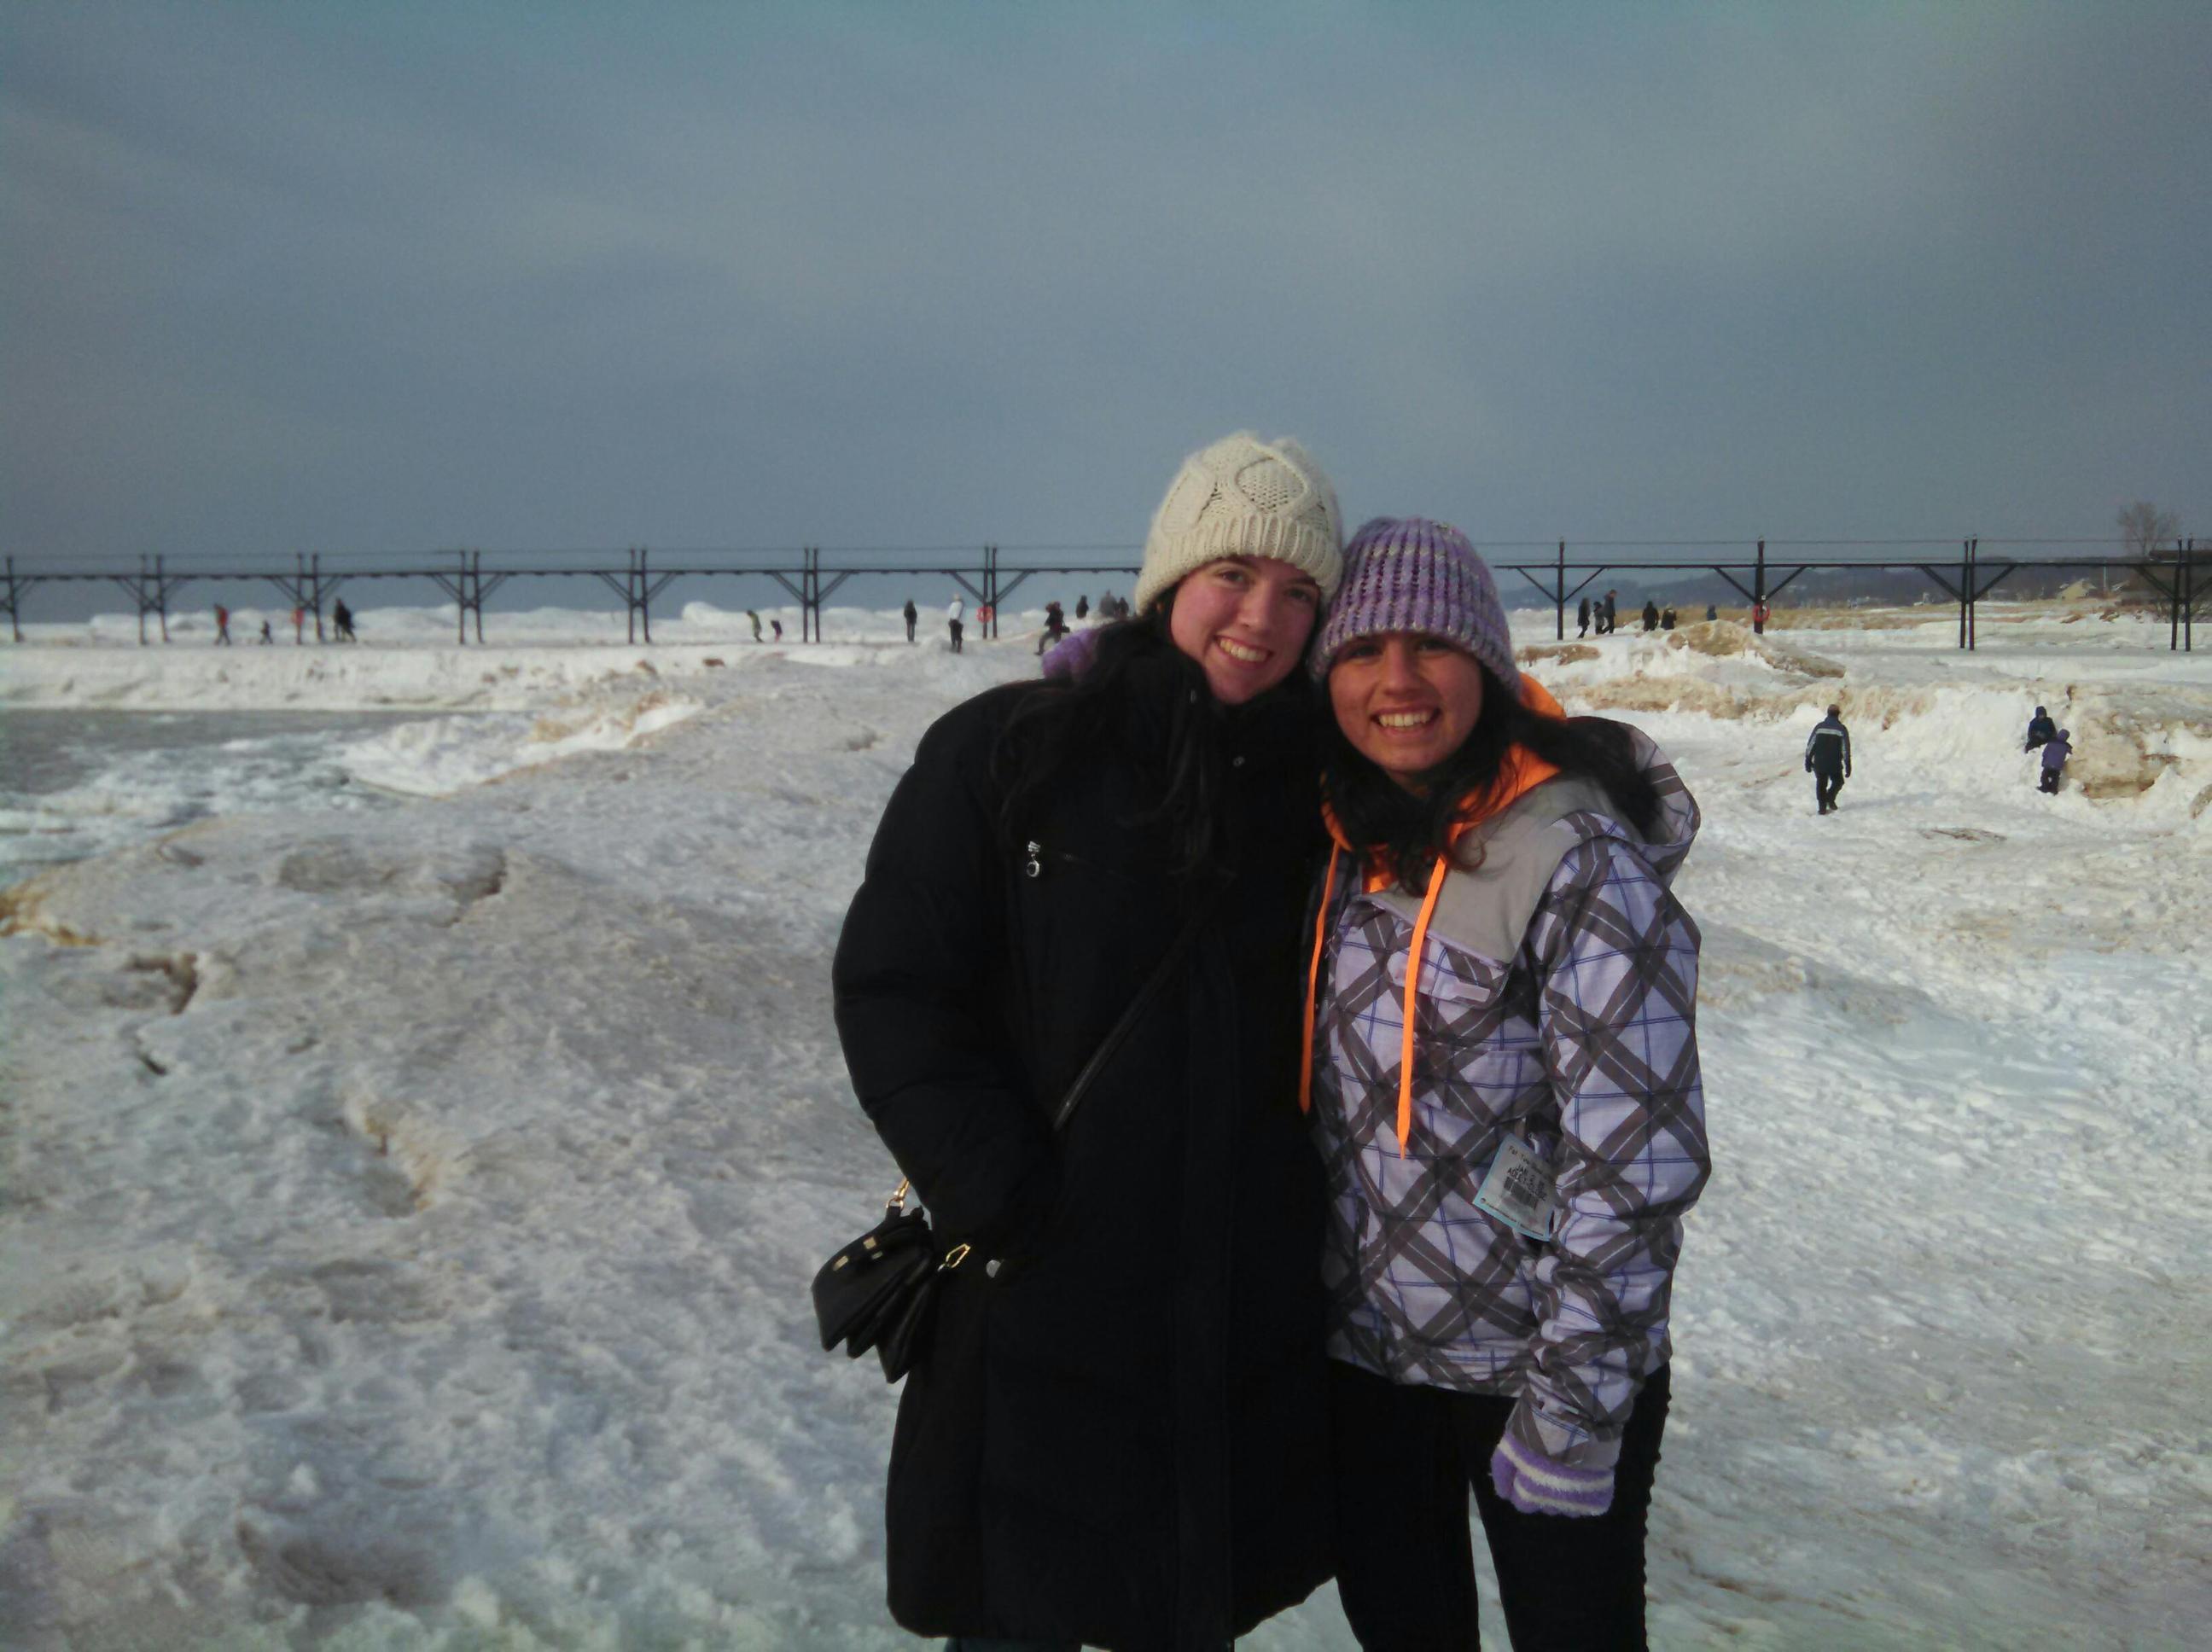 Ashley and I standing on the frozen Lake Michigan waves.